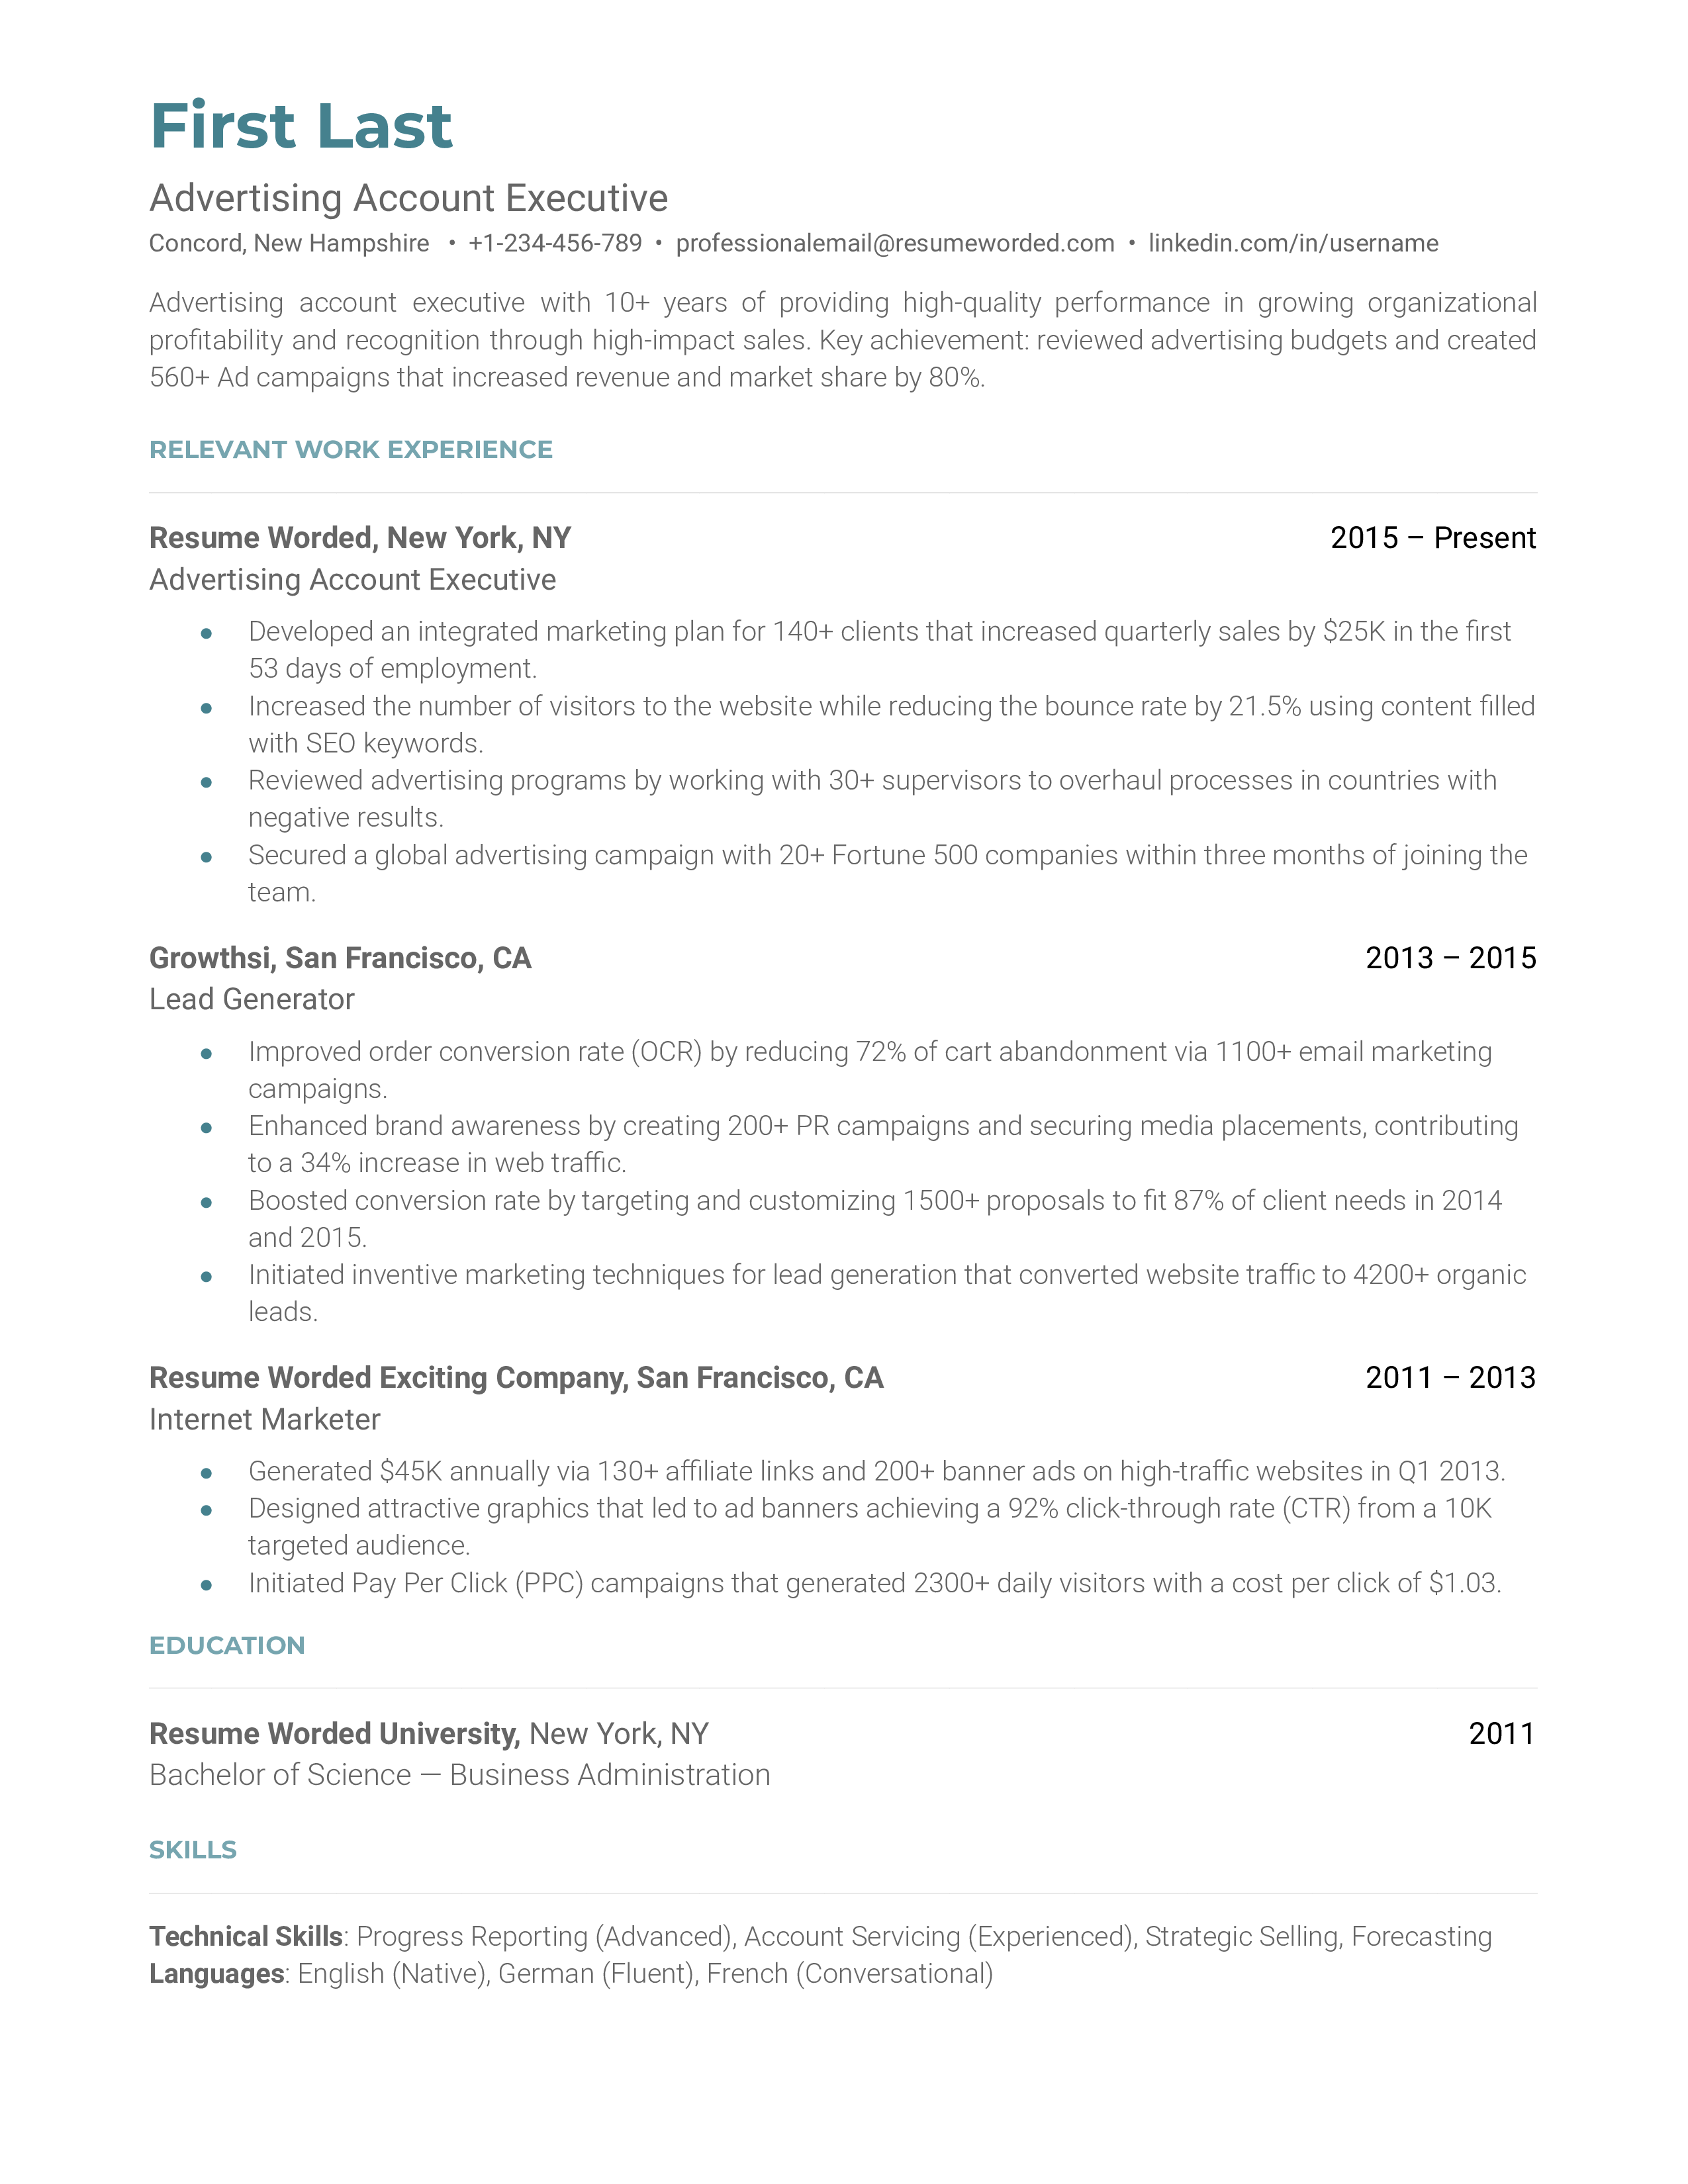 Advertising account executive resume sample that highlights applicant's experience and skills section.